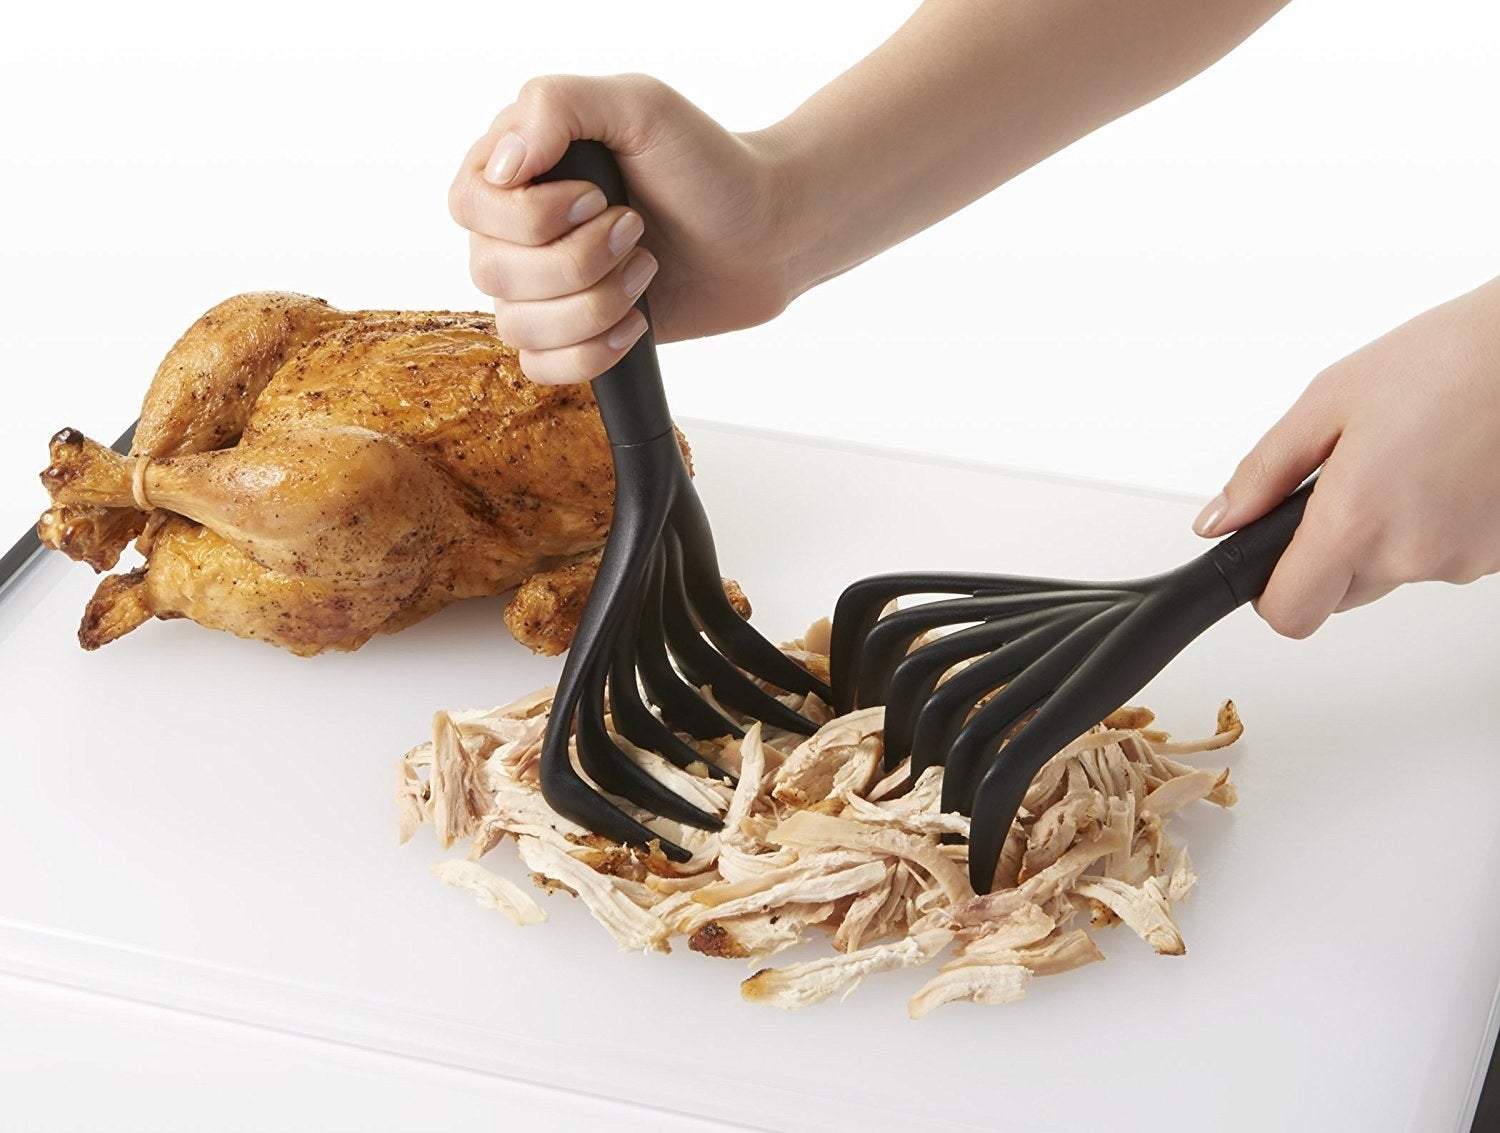 Model using the claws to shred some rotisserie chicken